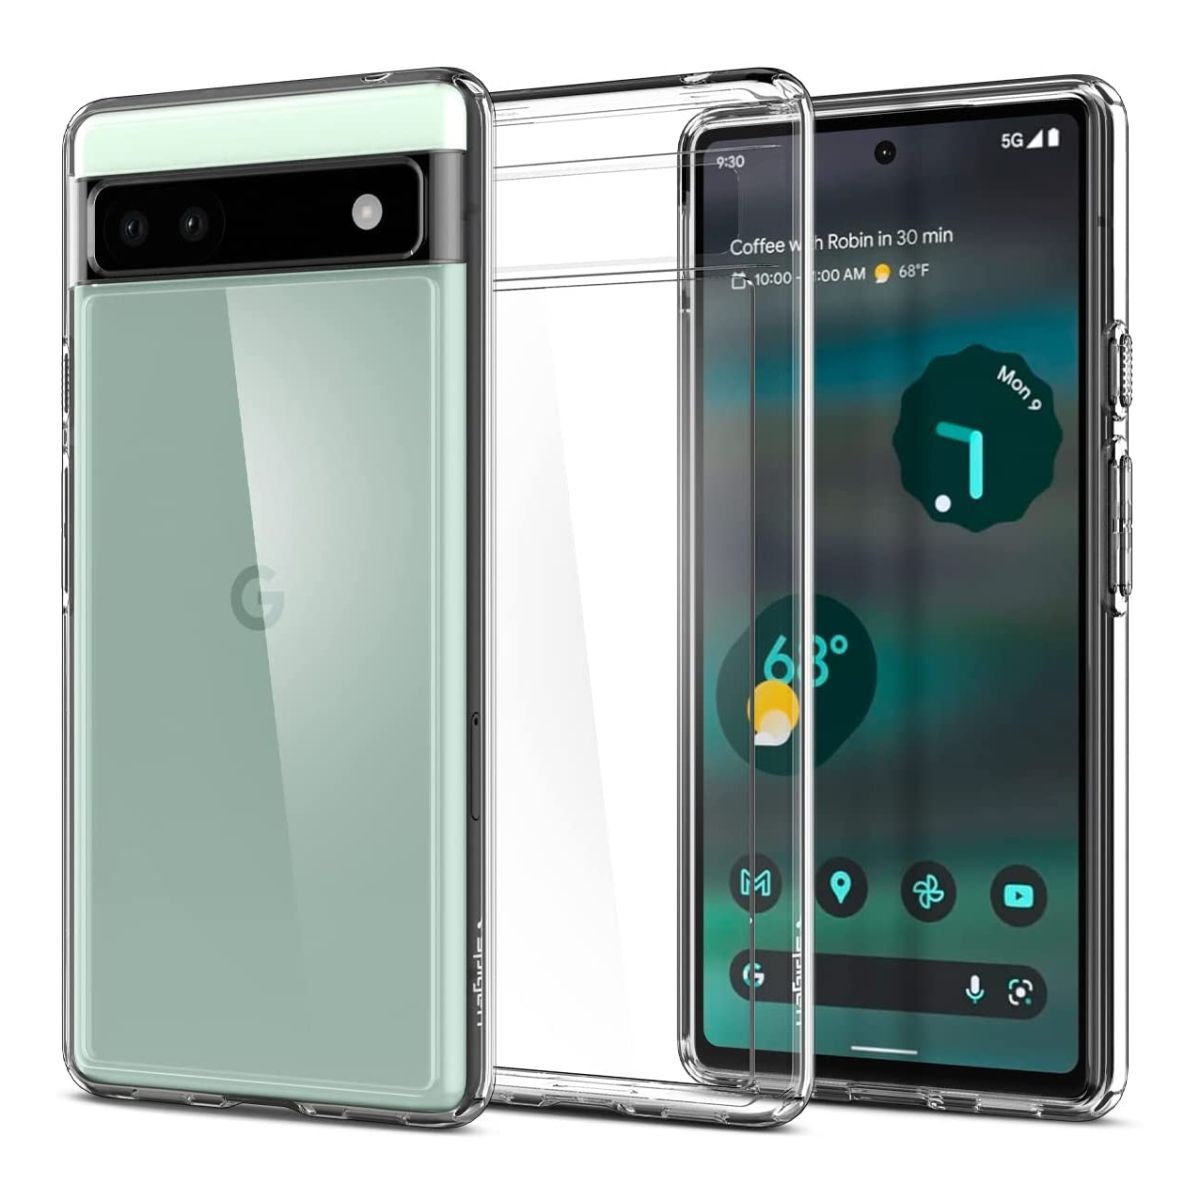 The Best Google Pixel 6a Cases and Covers for 2022